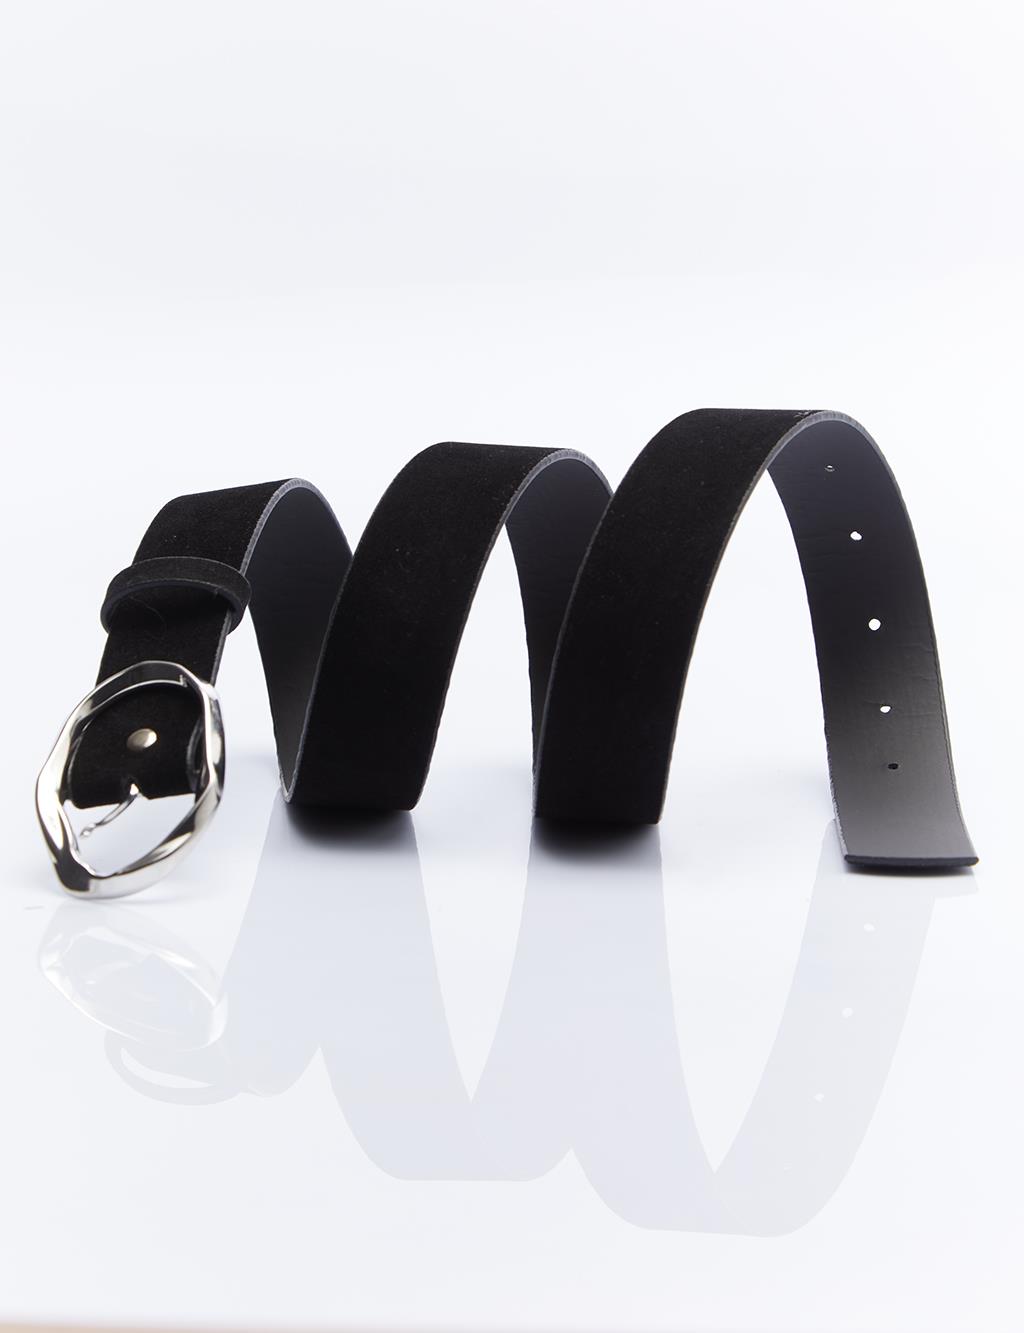 Belt with Small Metal Buckle Black Silver